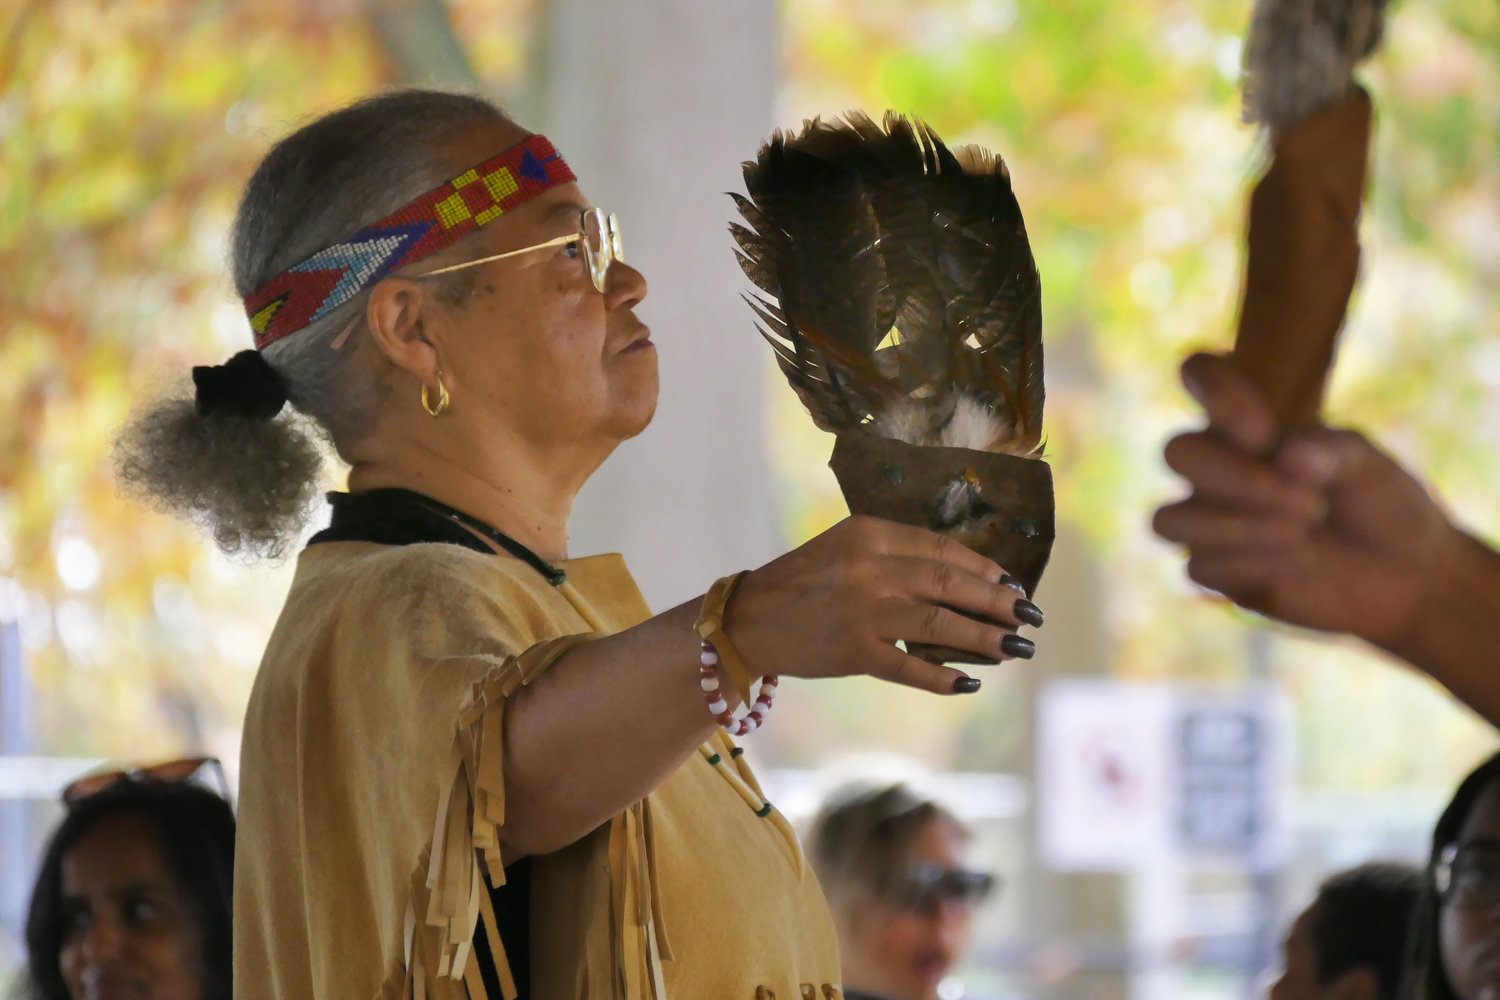 Performers demonstrated dances, artifacts and other traditions of Native Americans of Long Island at Hempstead Lake State Park on Nov. 2.